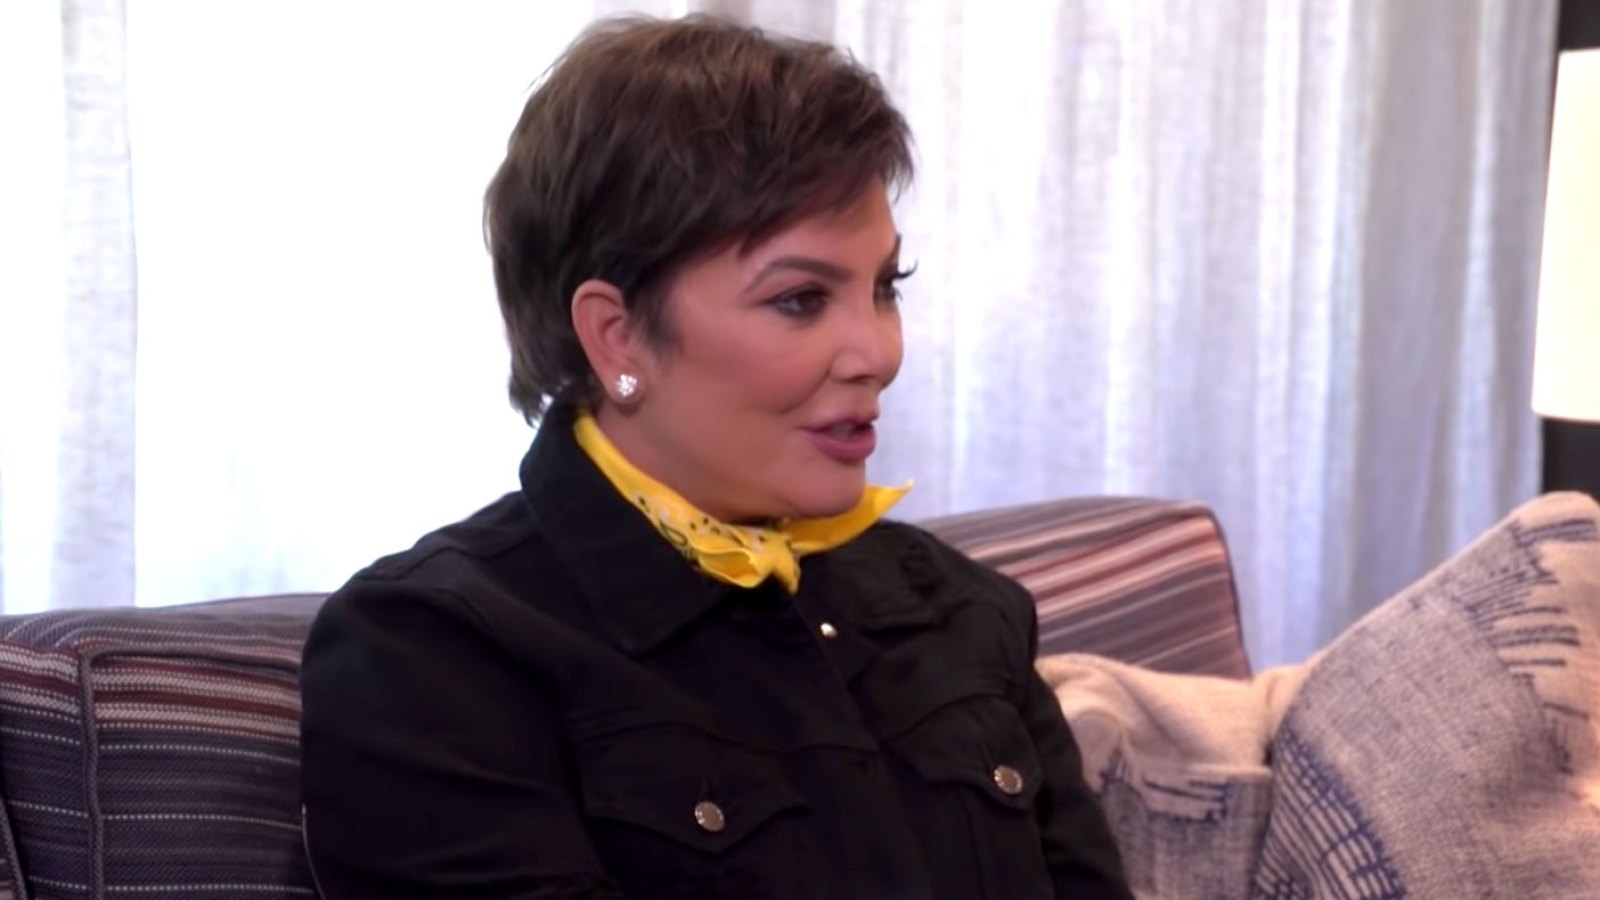 Kris Jenner Calls Family Meeting During Vacation: All of Us Have a 'Small to Medium Sized Issue With Each Other'